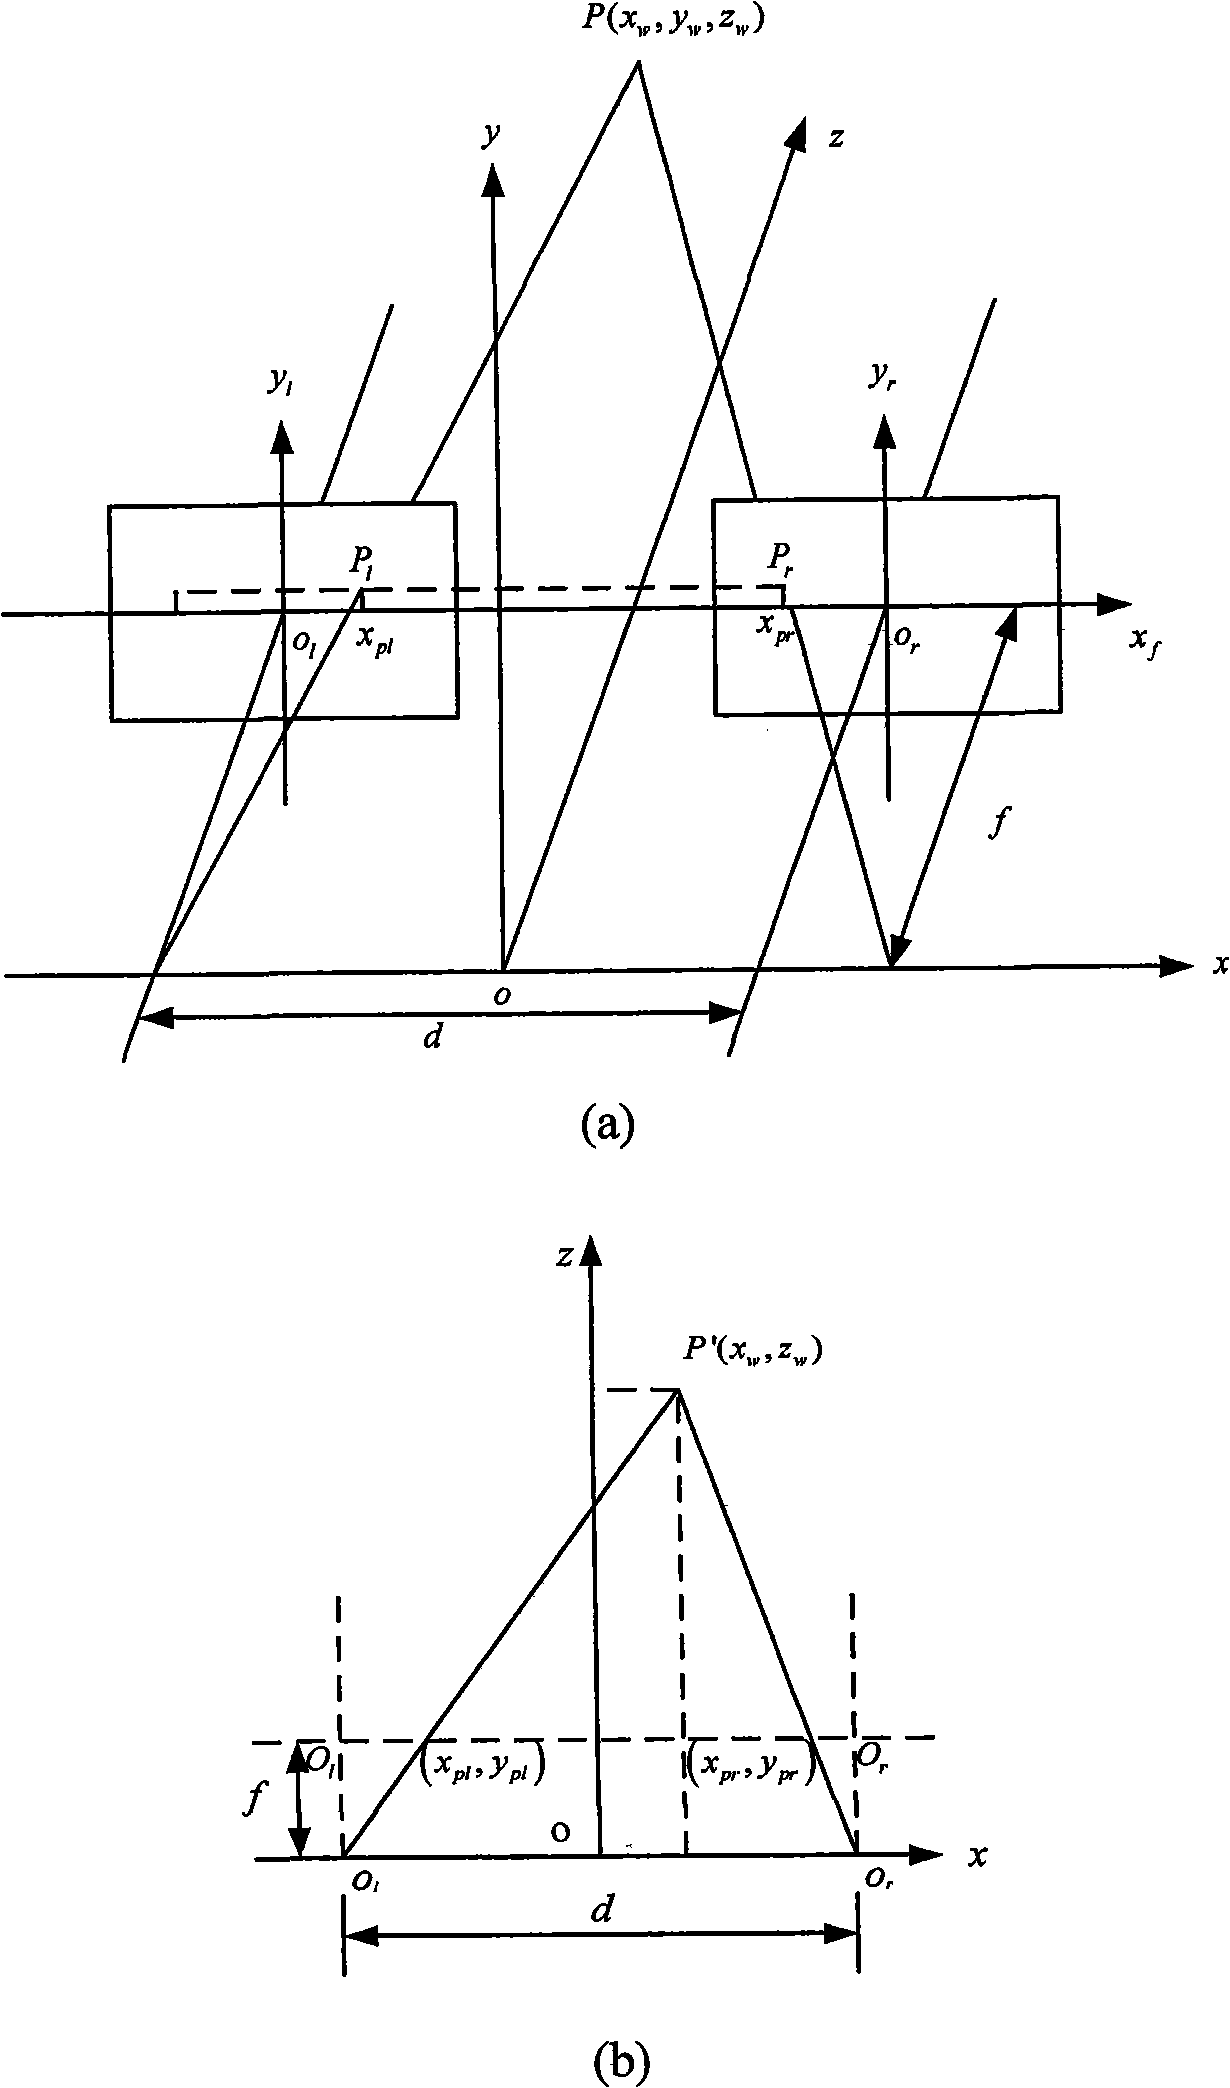 Monocular vision technique based fire monitor control method for adjusting relative positions of fire point and water-drop point